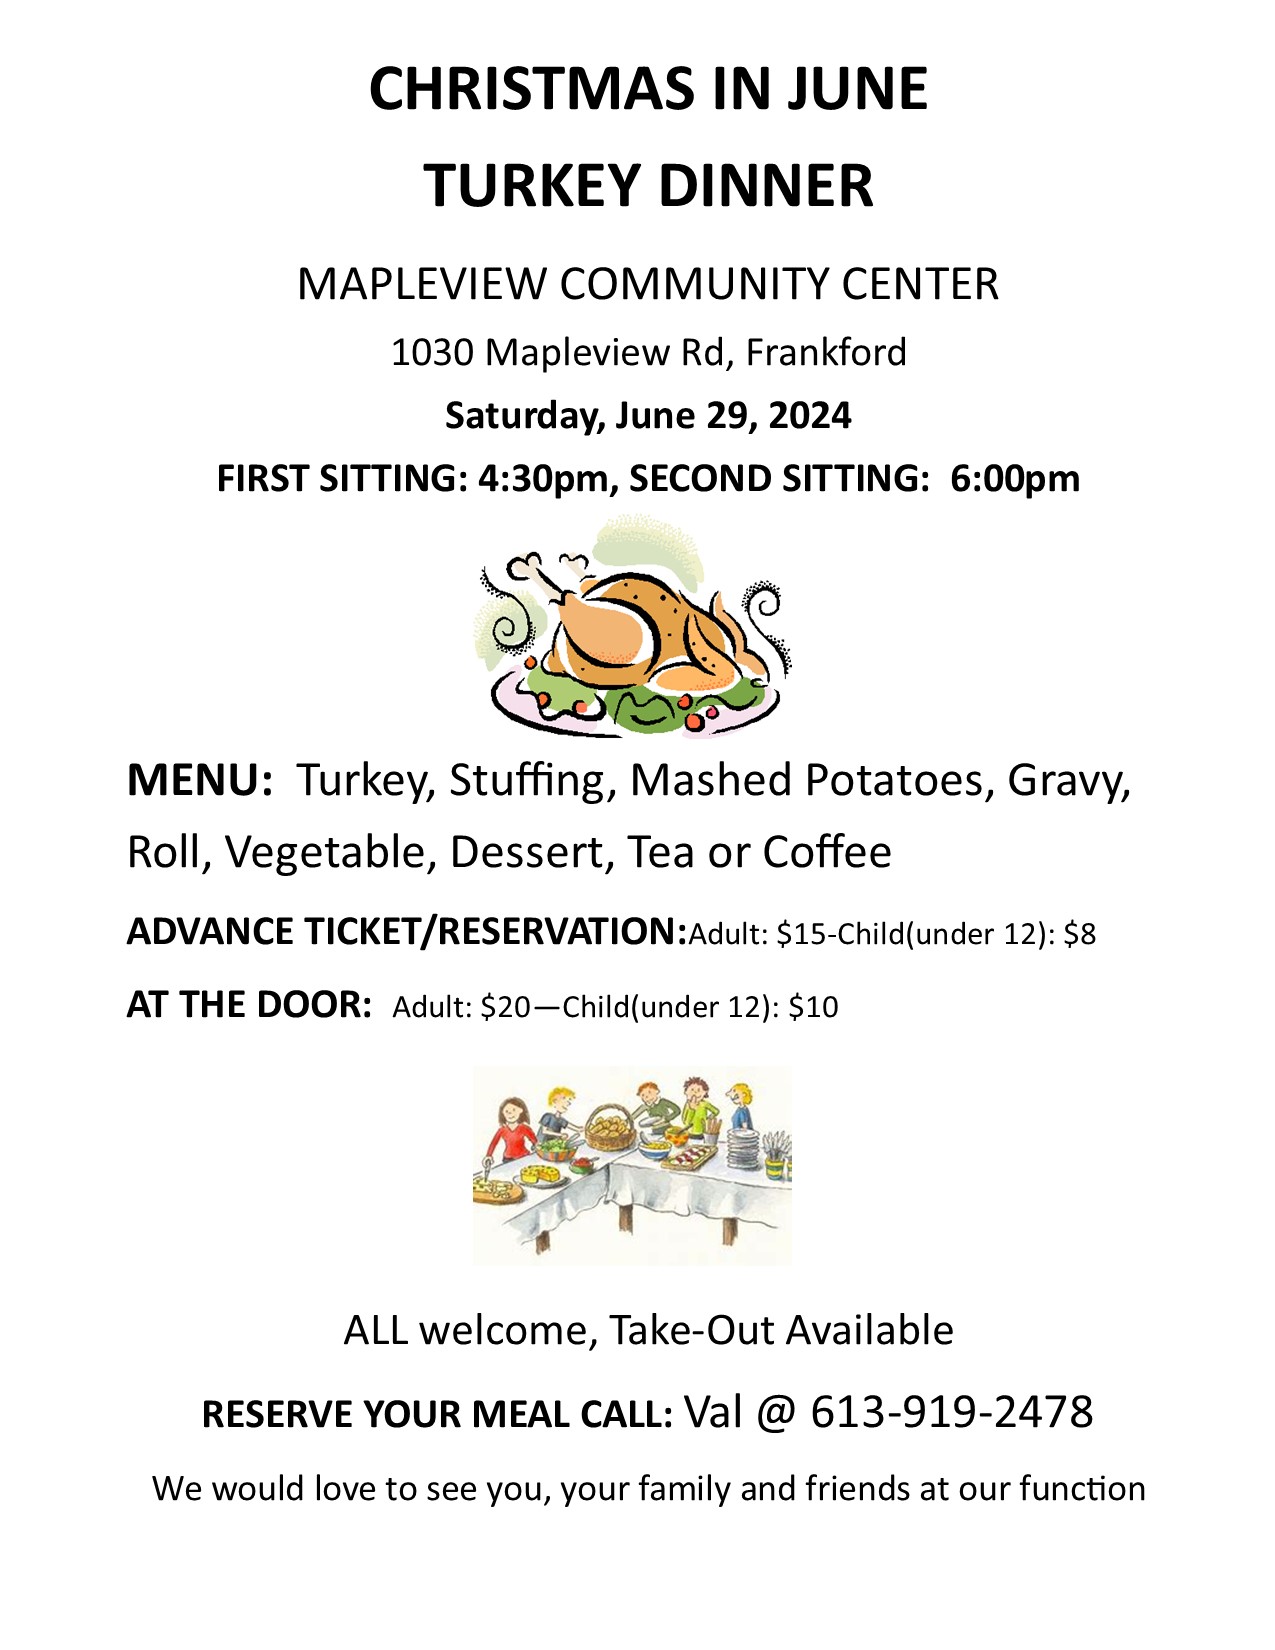 Poster with event details and graphic of a turkey dinner